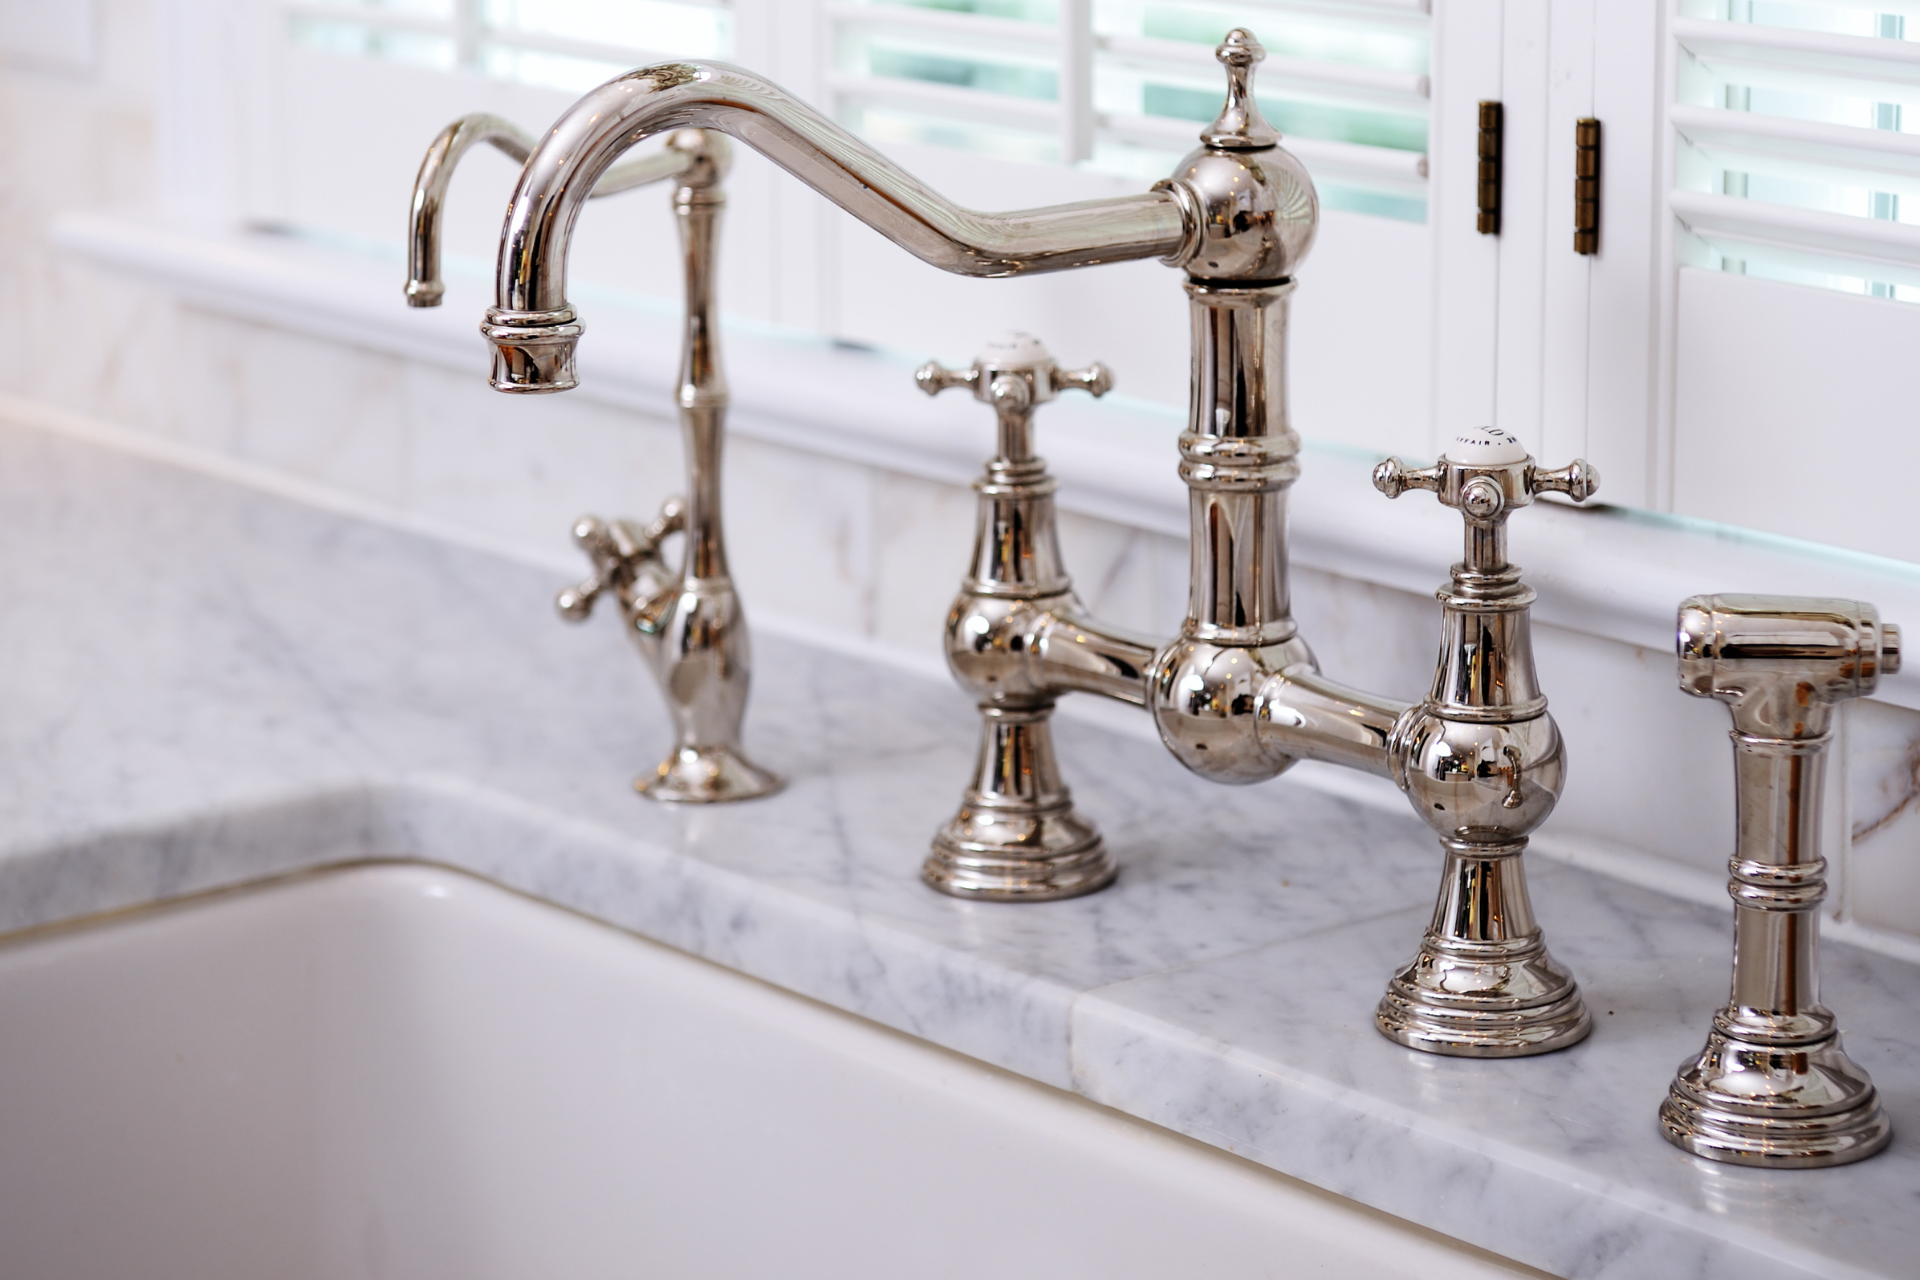 Brand new intricate residential kitchen faucet